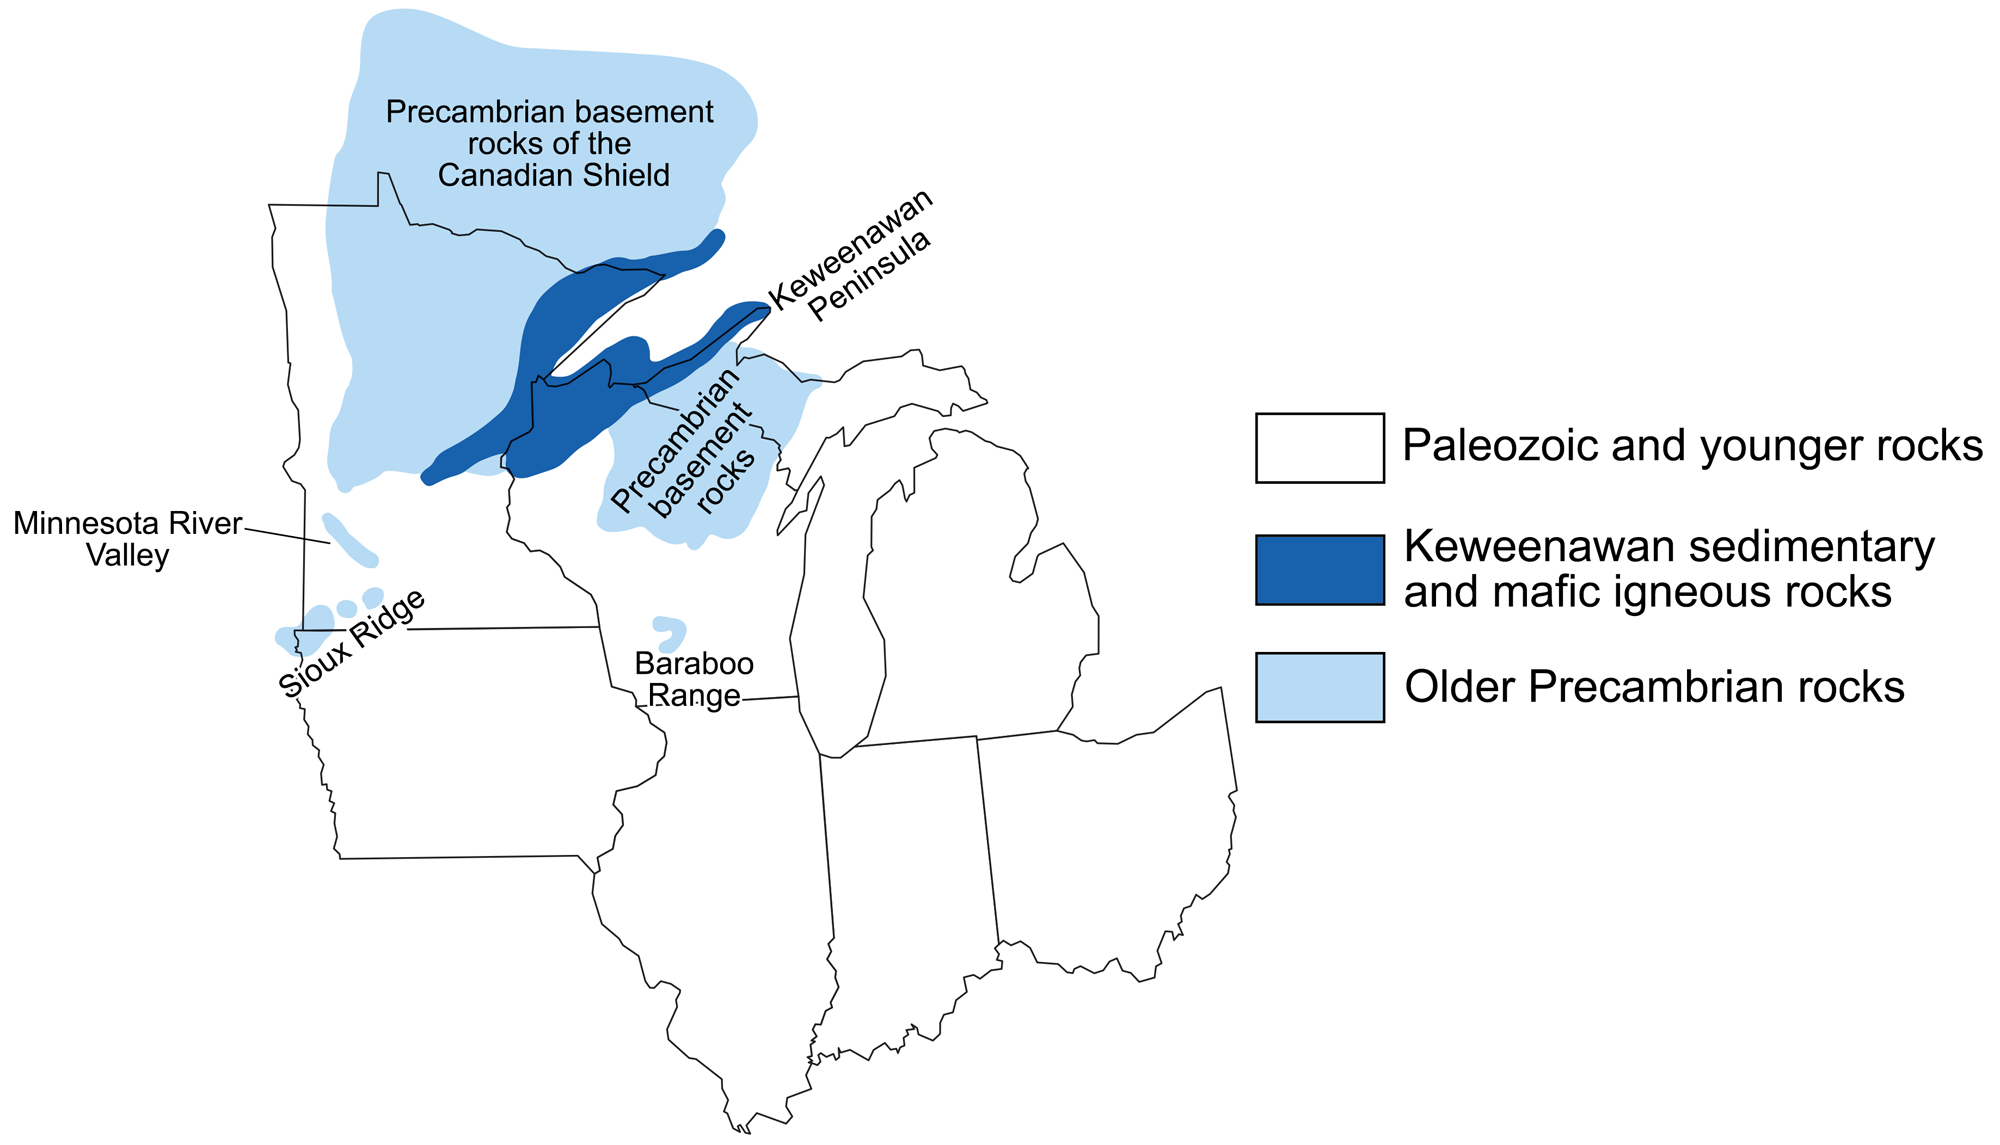 Map of Precambrian rocks in the midwestern region. The map shows the Midwestern states with the borders of states outlined in black. Most of the region is white, indicating Paleozoic and younger rocks. Keweenawan sedimentary and mafic igneous rocks are shaded dark blue and occur in northeastern Minnesota, northwestern Wisconsin, and the western Upper Peninsula of Michigan. Older Precambrian rocks and shaded light blue and occur in northern Minnesota, Northern Wisconsin, the western Upper Peninsula of Michigan. A few isolated outcrops also occur in the southwestern Minnesota and northwestern Iowa in the Minnesota River Valley and the Sioux Range, as well as in southwestern Wisconsin in the Baraboo Range.